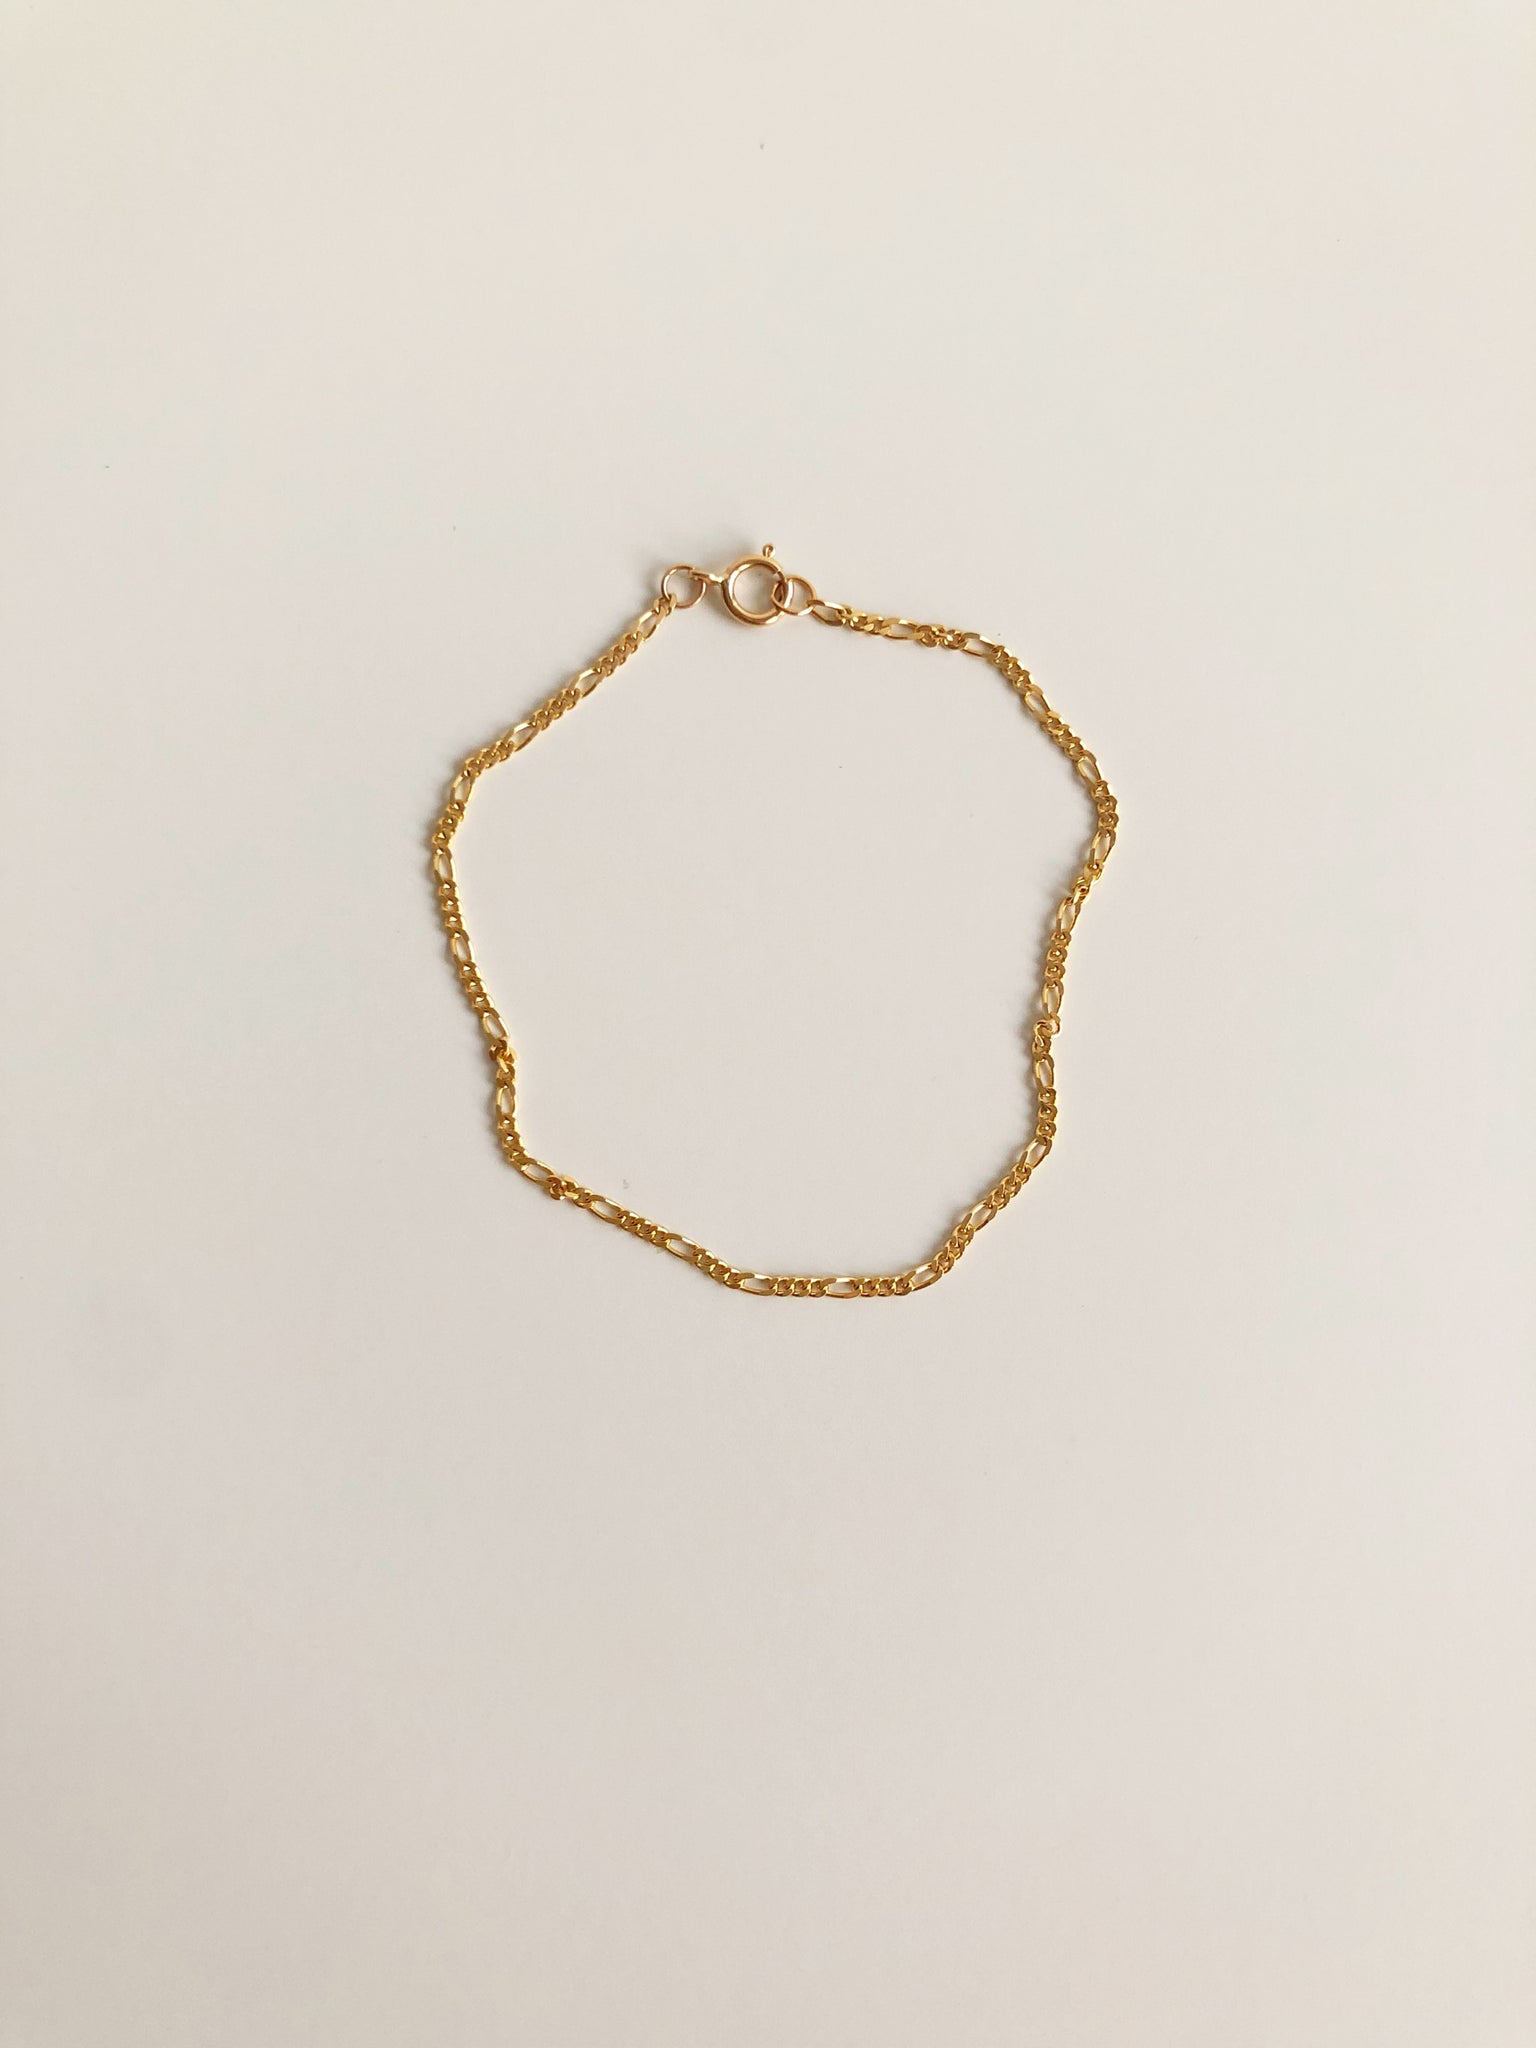 Everyday Thin Figaro Chain Necklace / Bracelet, Solid 14k Gold